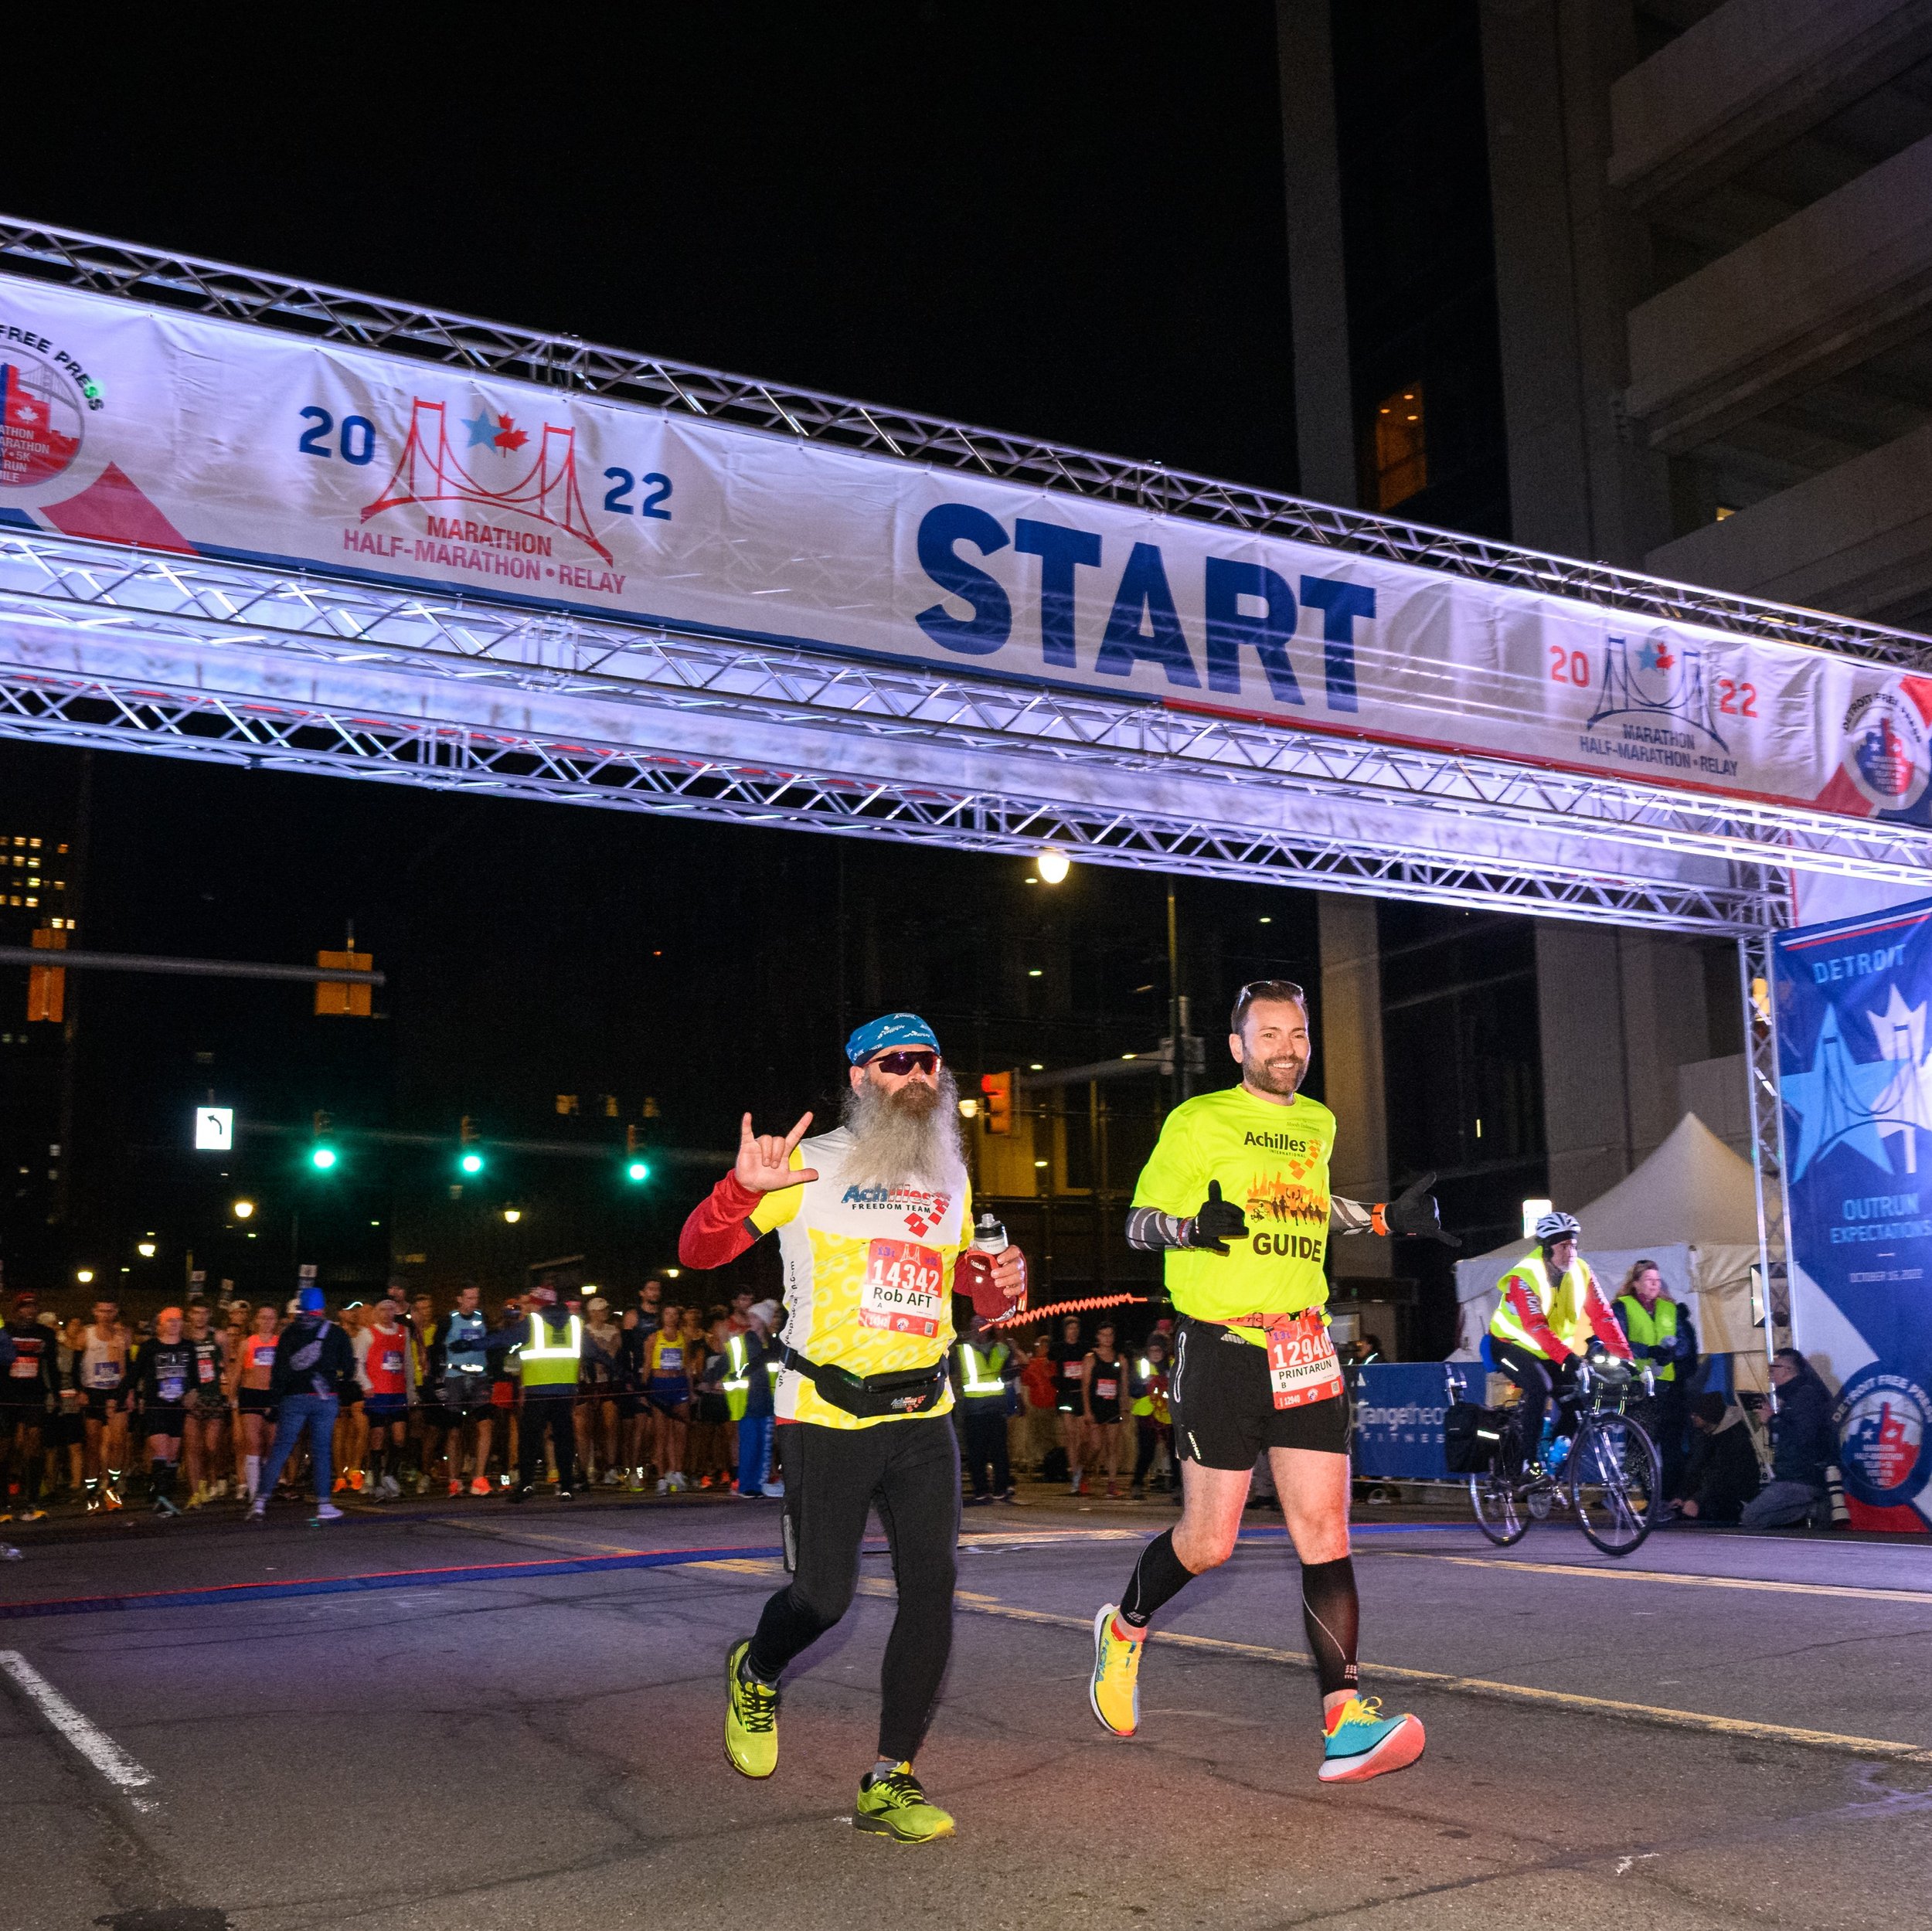  Achilles Freedom Team athlete and his guide crossing the start line at the Detroit Marathon 